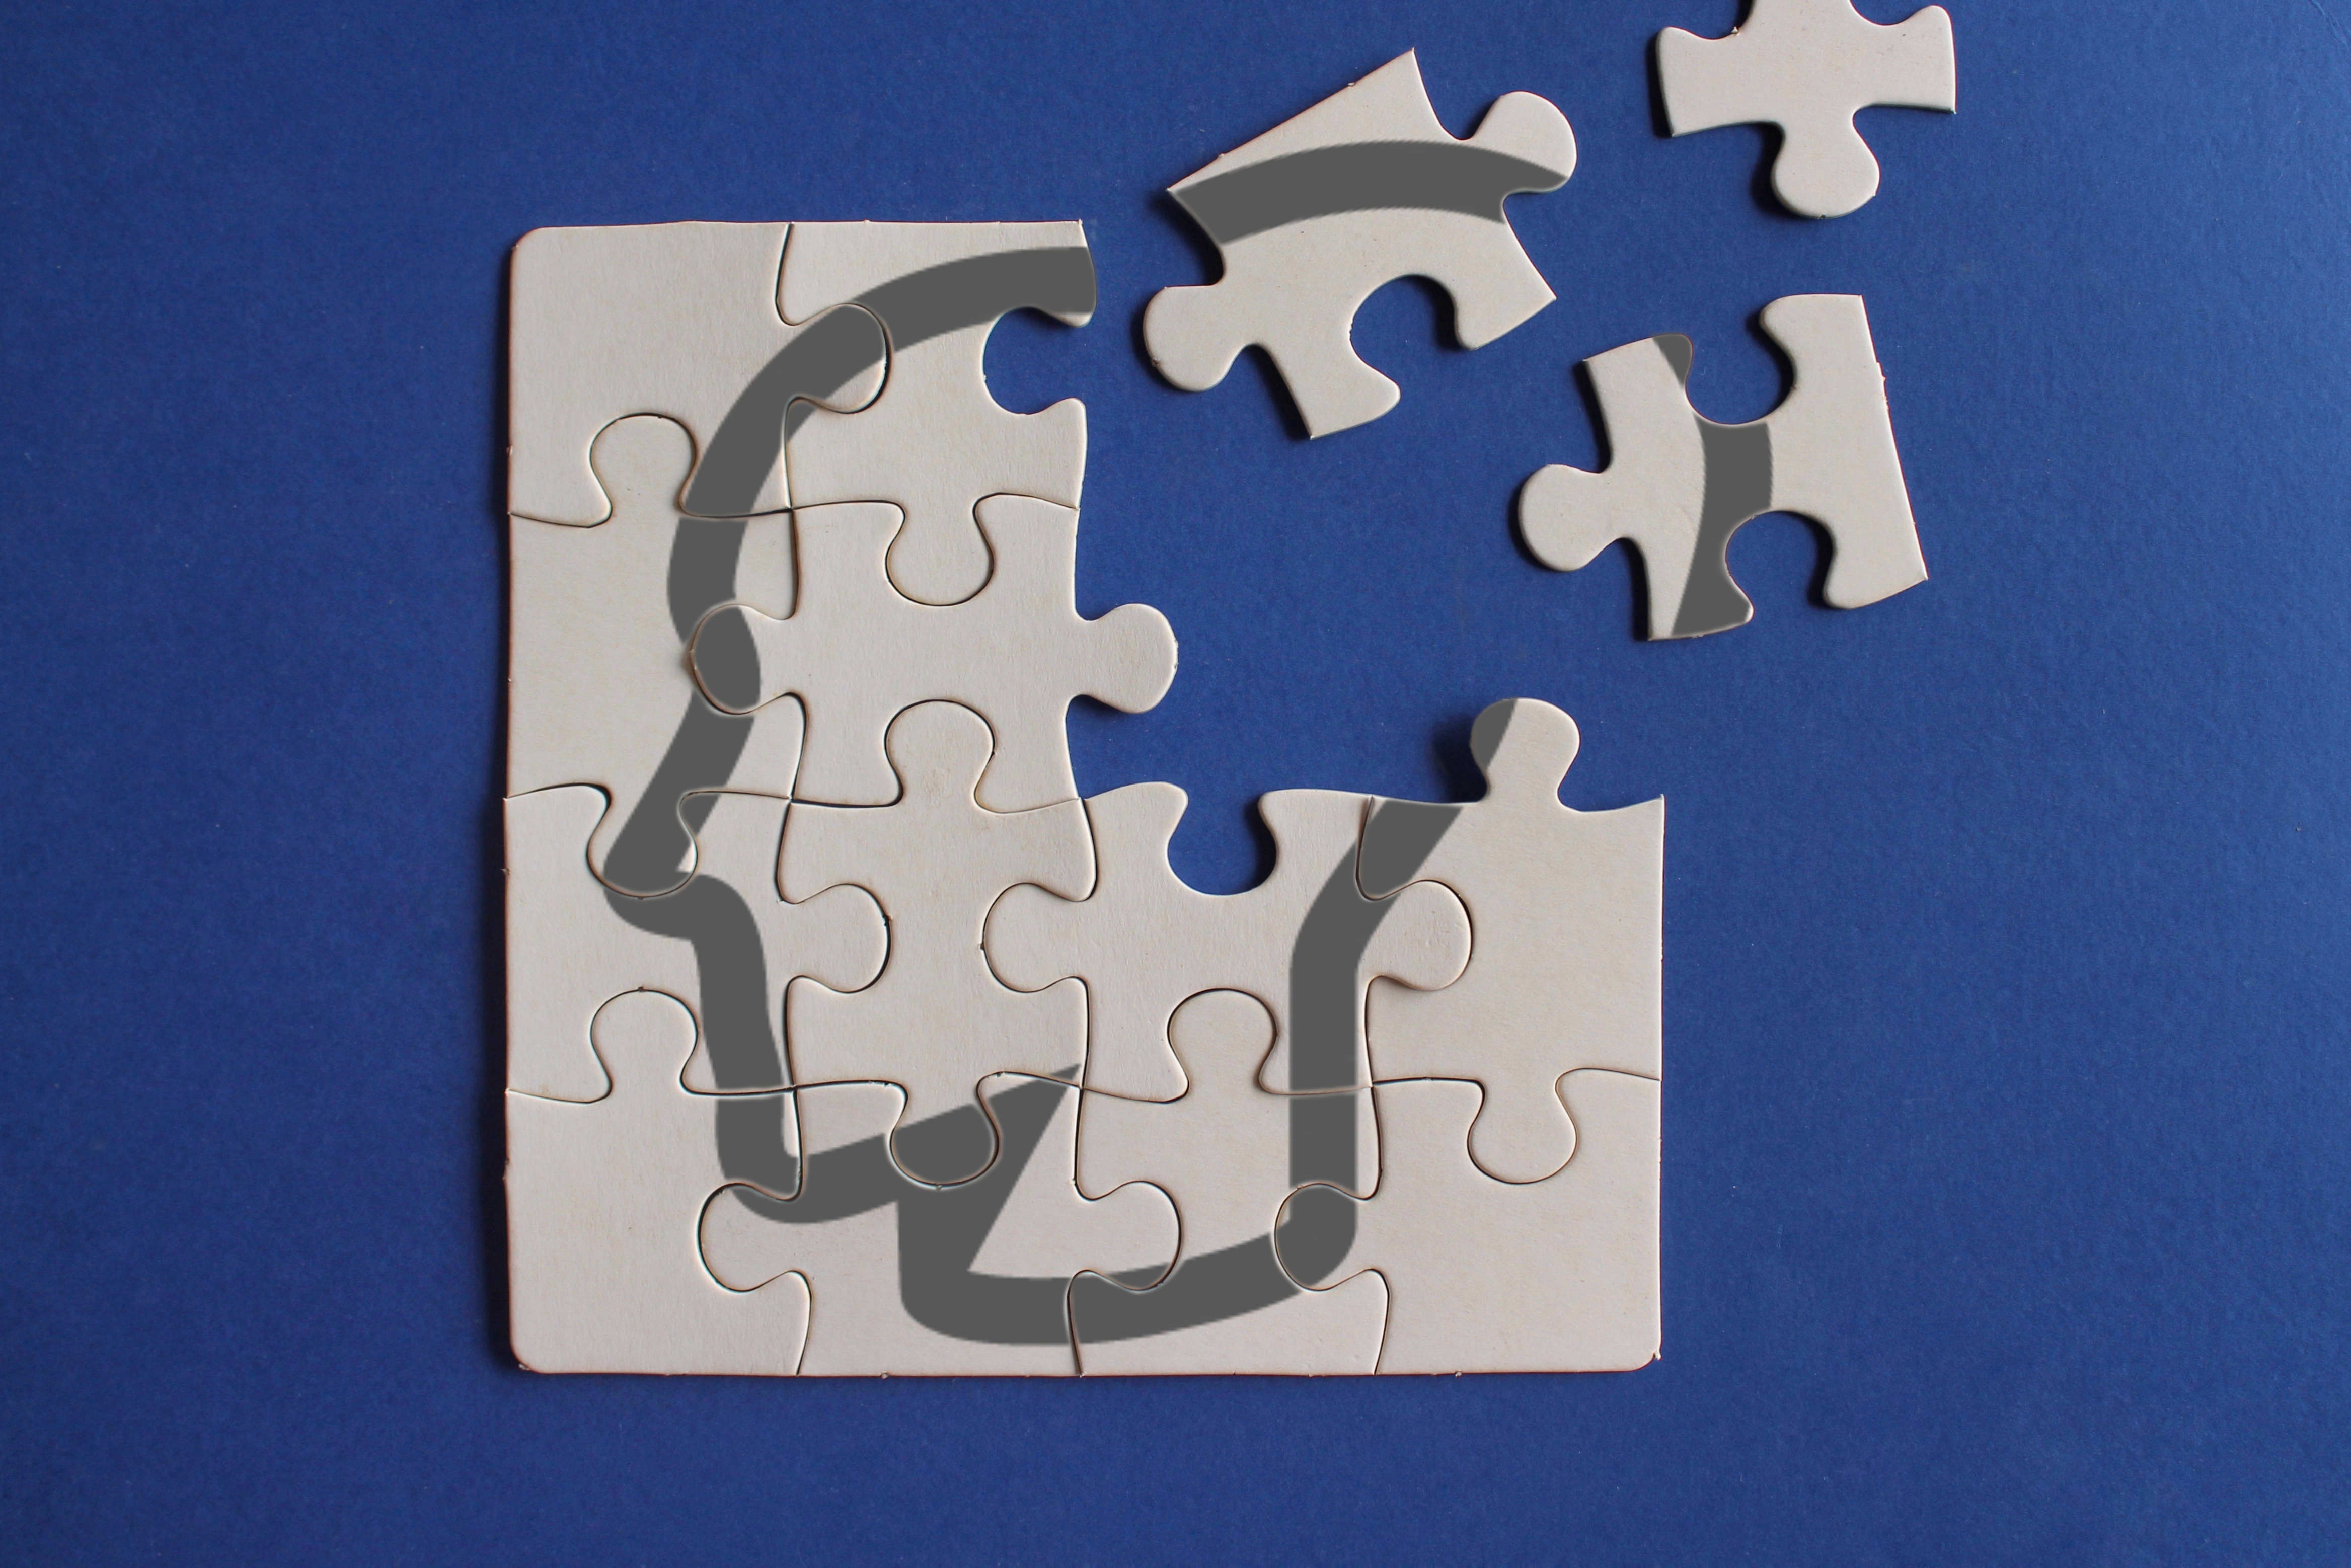 Human head on incomplete puzzle